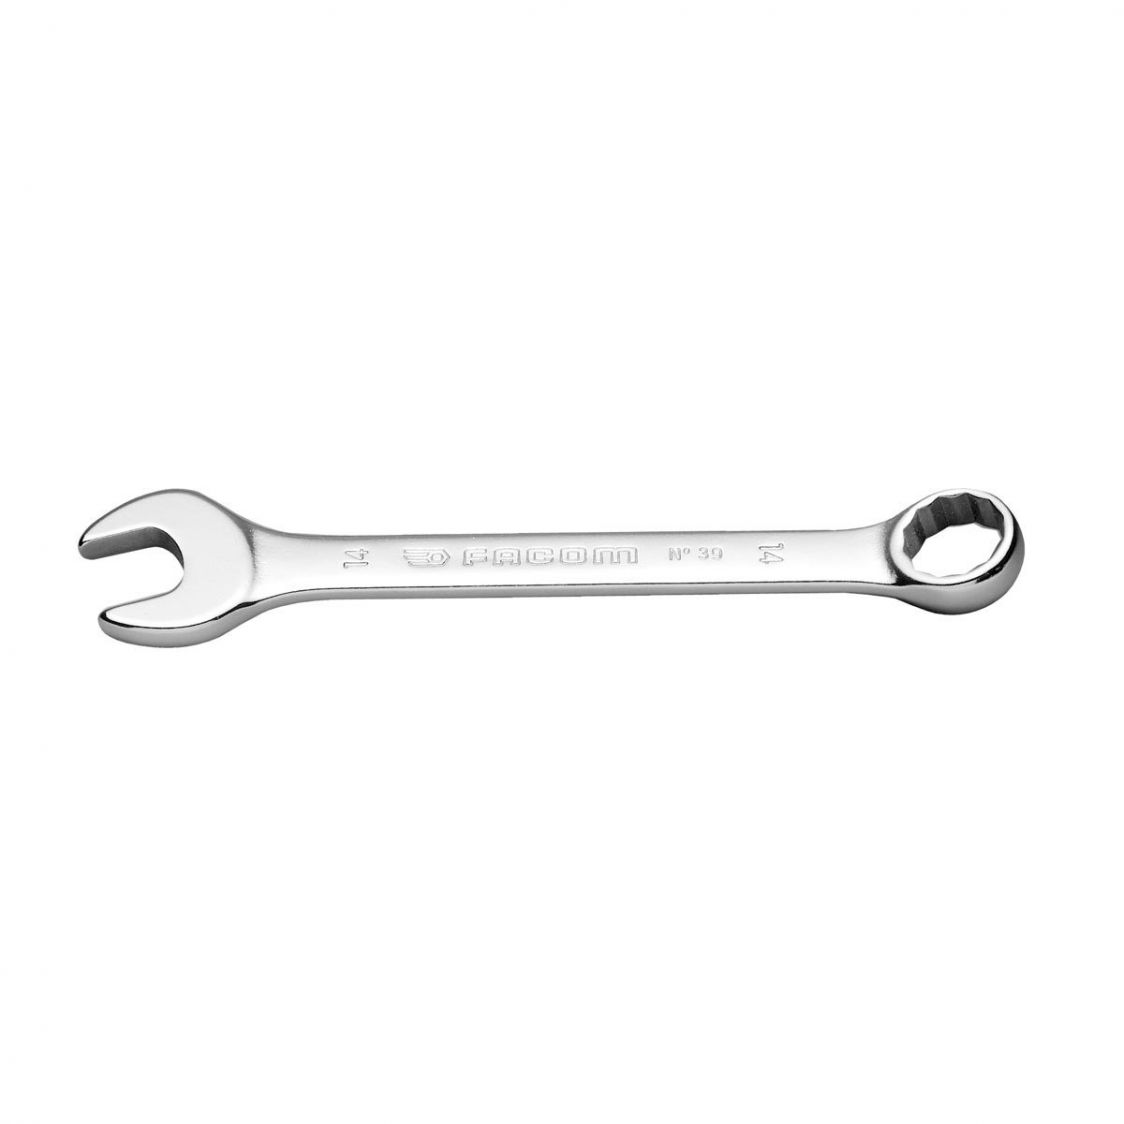 FACOM 39.9 - 9mm Metric Stubby Combination Spanner